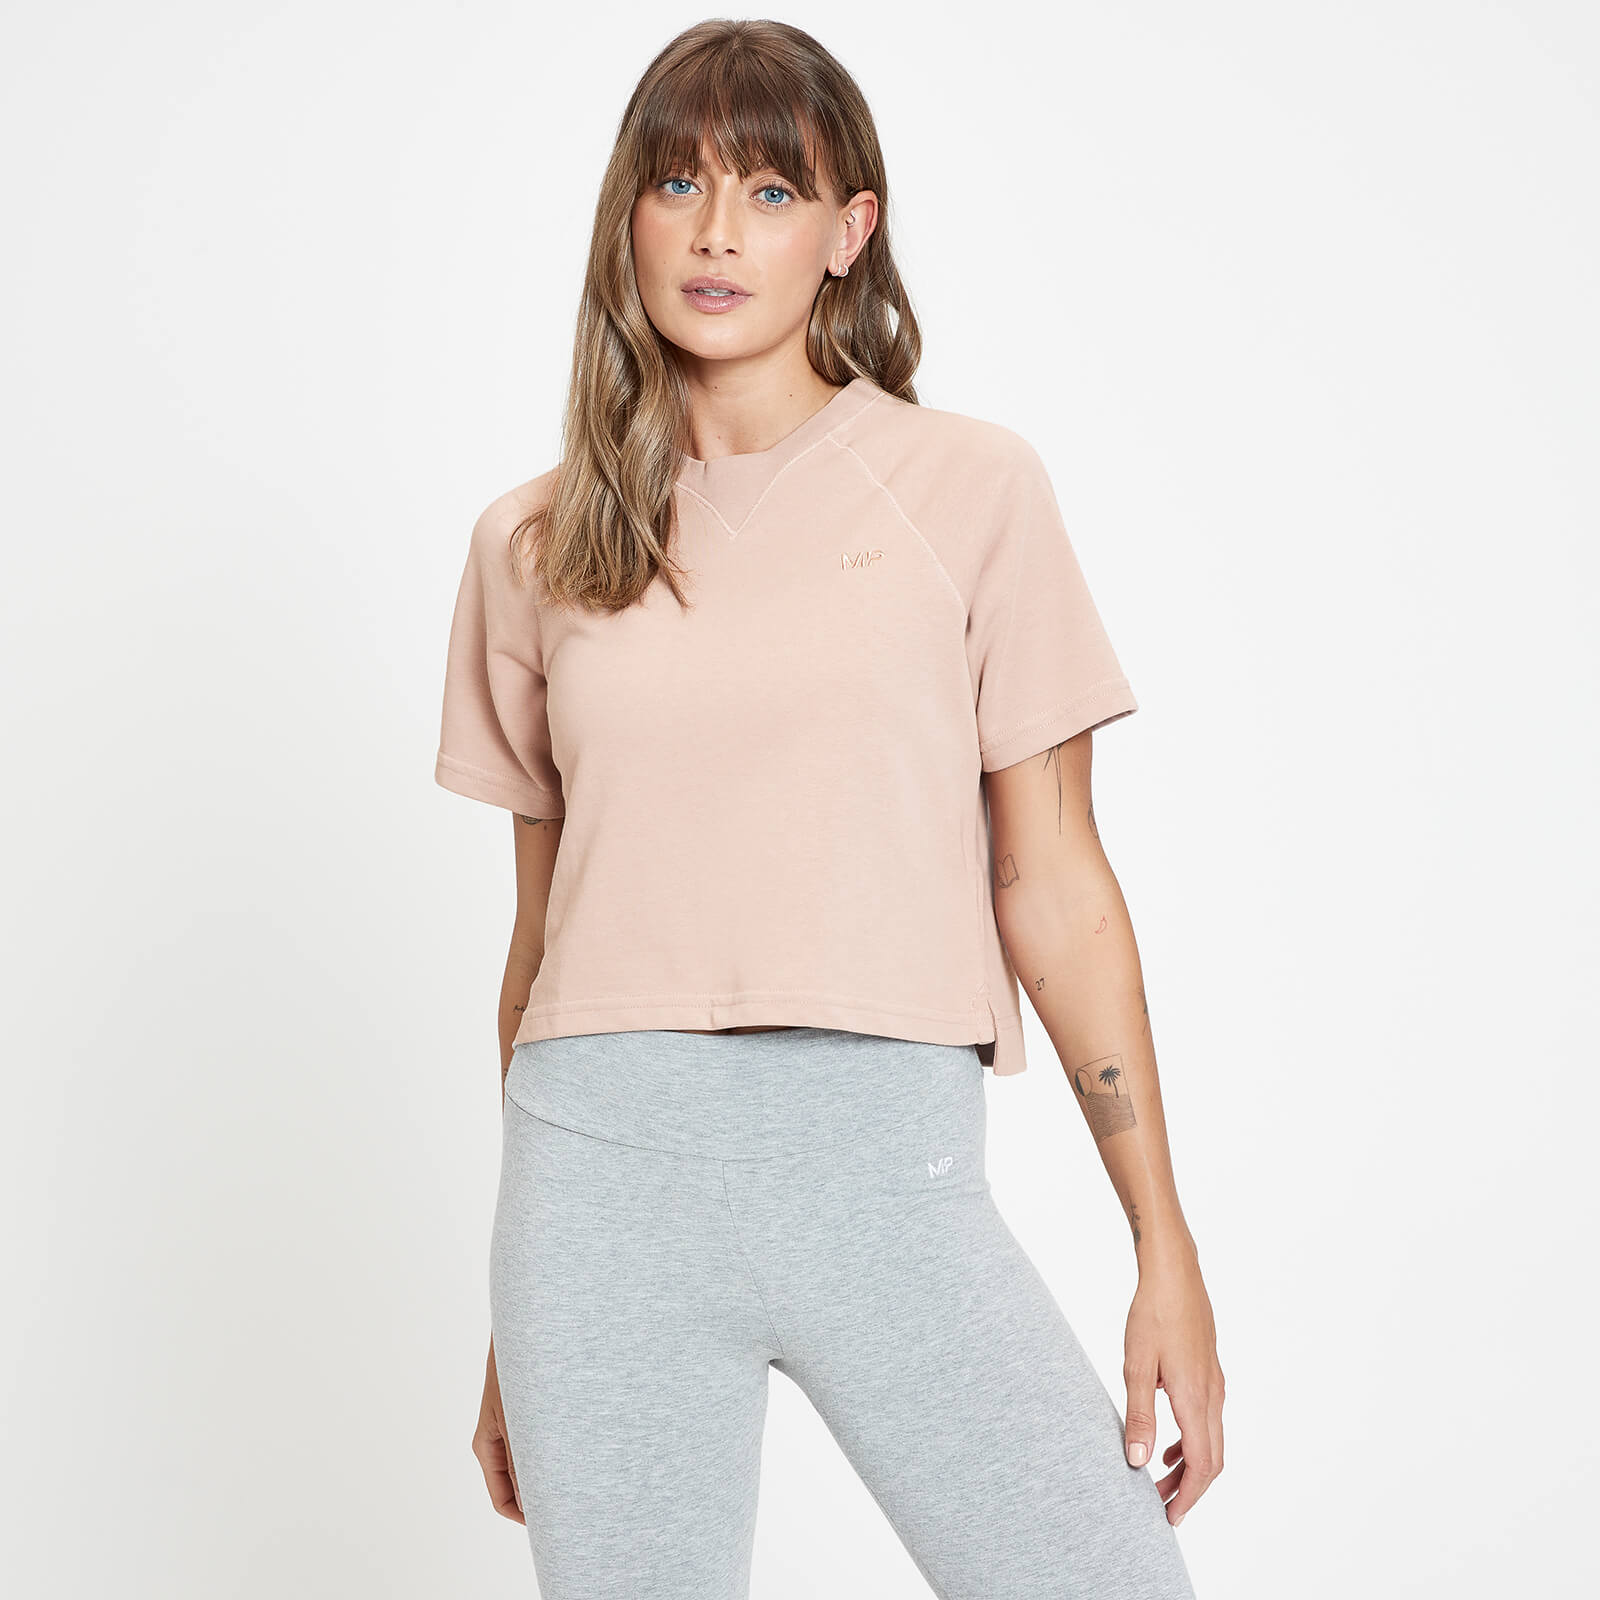  MP Women's Rest Day Short Sleeve Top - Fawn - S